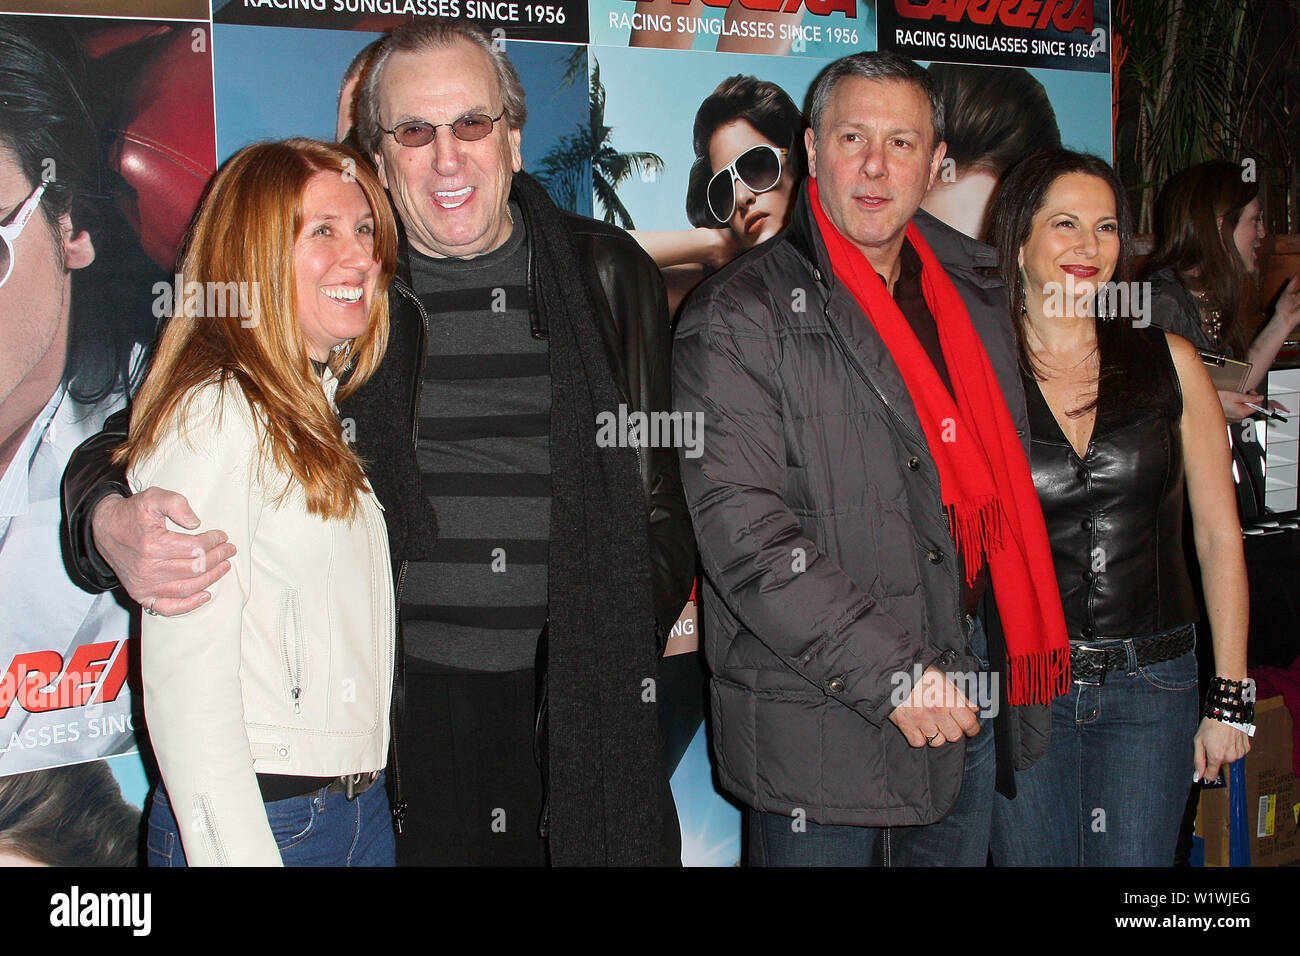 New York, USA. 13 March, 2009. Candace Keough, Actor, Danny Aiello, Mark Ugenti, Eden Wexler at the launch of Carrera Vintage Sunglasses at Angel Orensanz Foundation. Credit: Steve Mack/Alamy Stock Photo